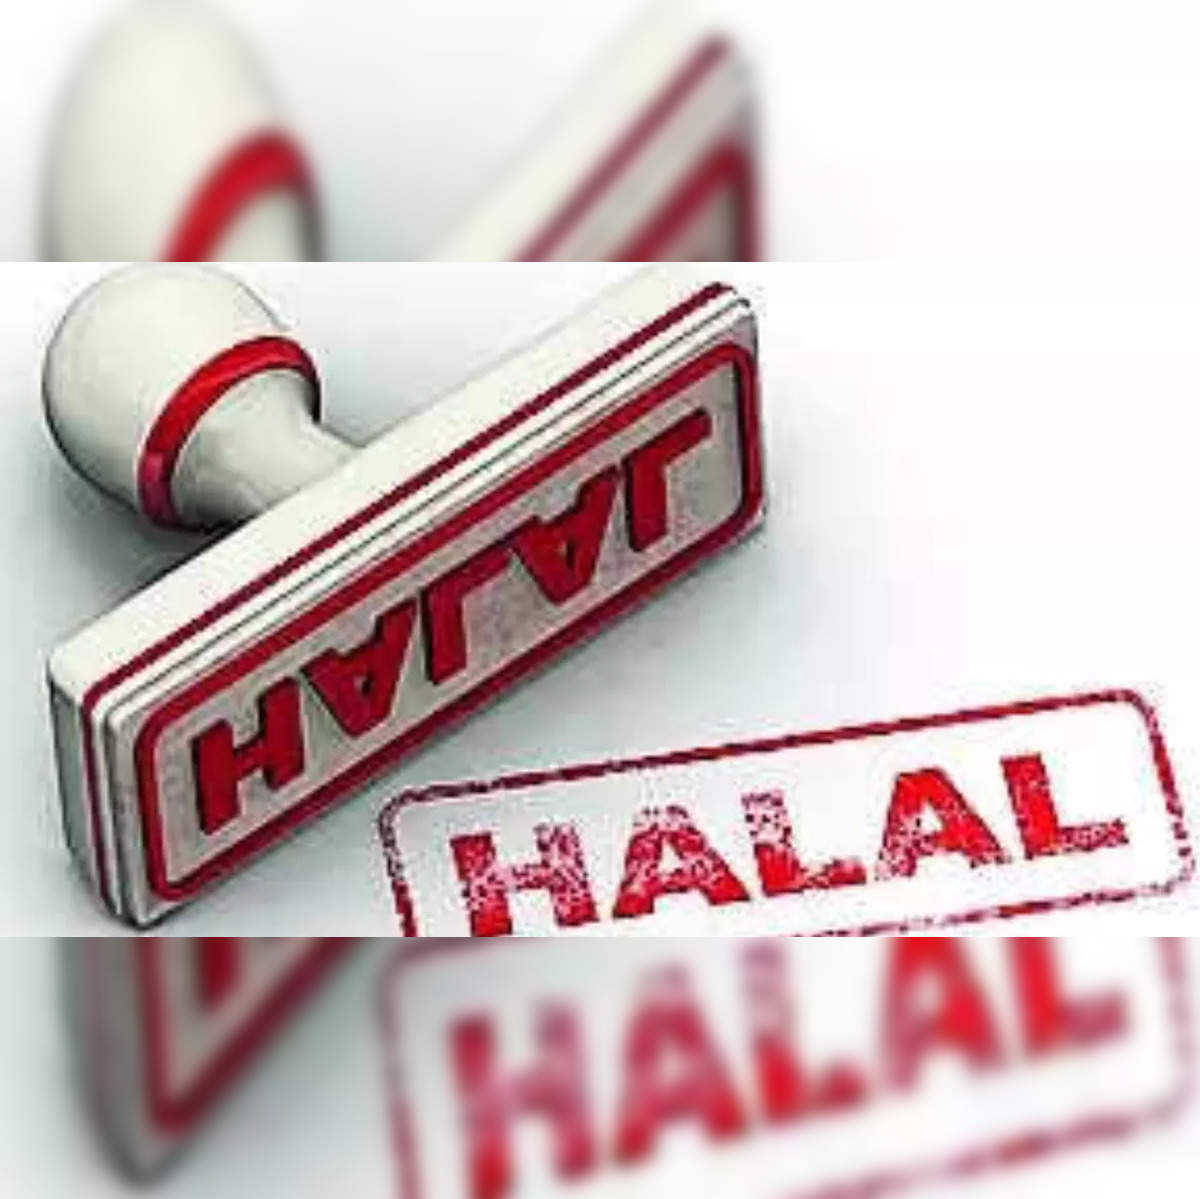 halal: Why Yogi-led UP government has banned Halal-certified food products  - The Economic Times